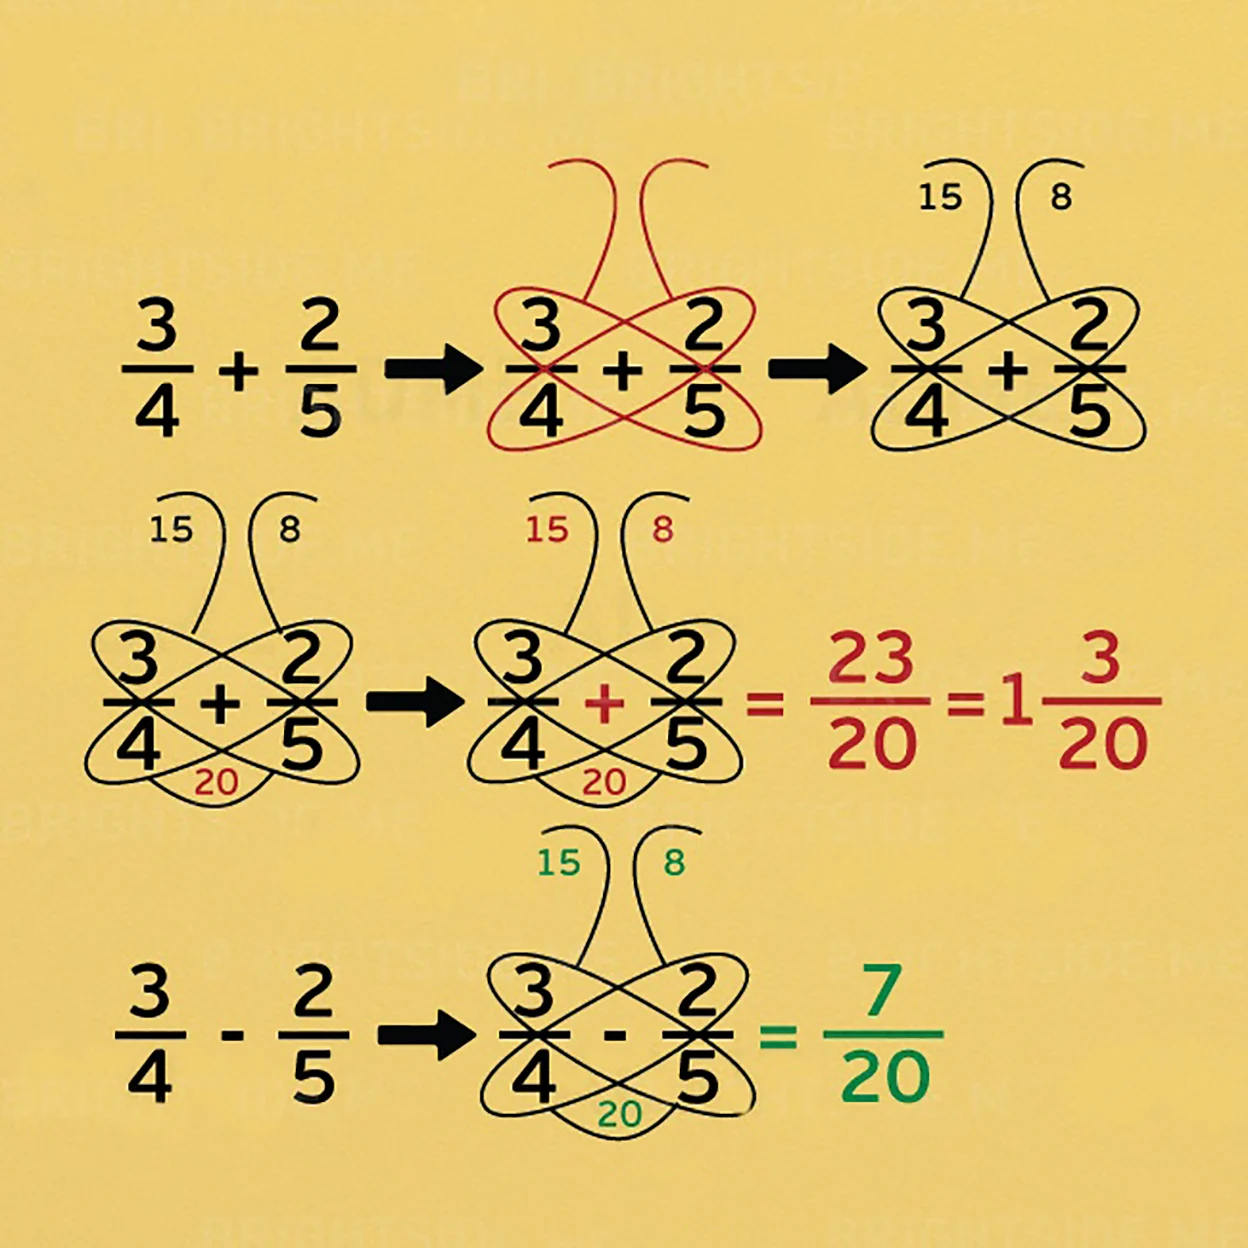 Butterfly Method For Adding And Subtracting Fractions